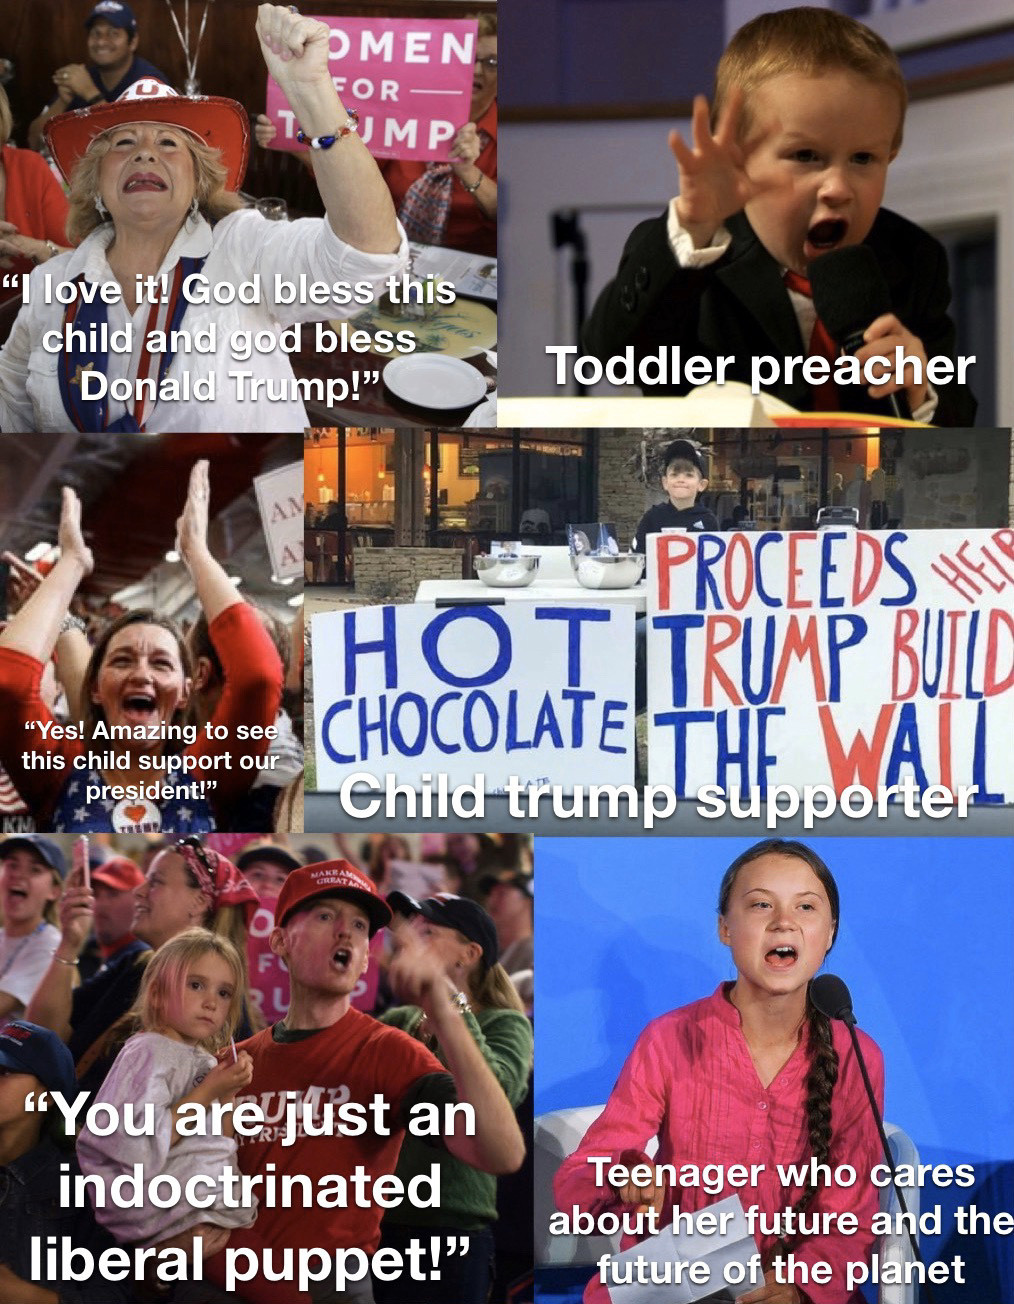 kanon tipton - Omen For Mp "I love it! God bless this child and god bless Donald Trump!" Toddler preacher Proceeds Are Hot Trump Build Chocolate Tue Wat this child support our president!" Child trump supporter "You are just an indoctrinated liberal puppet